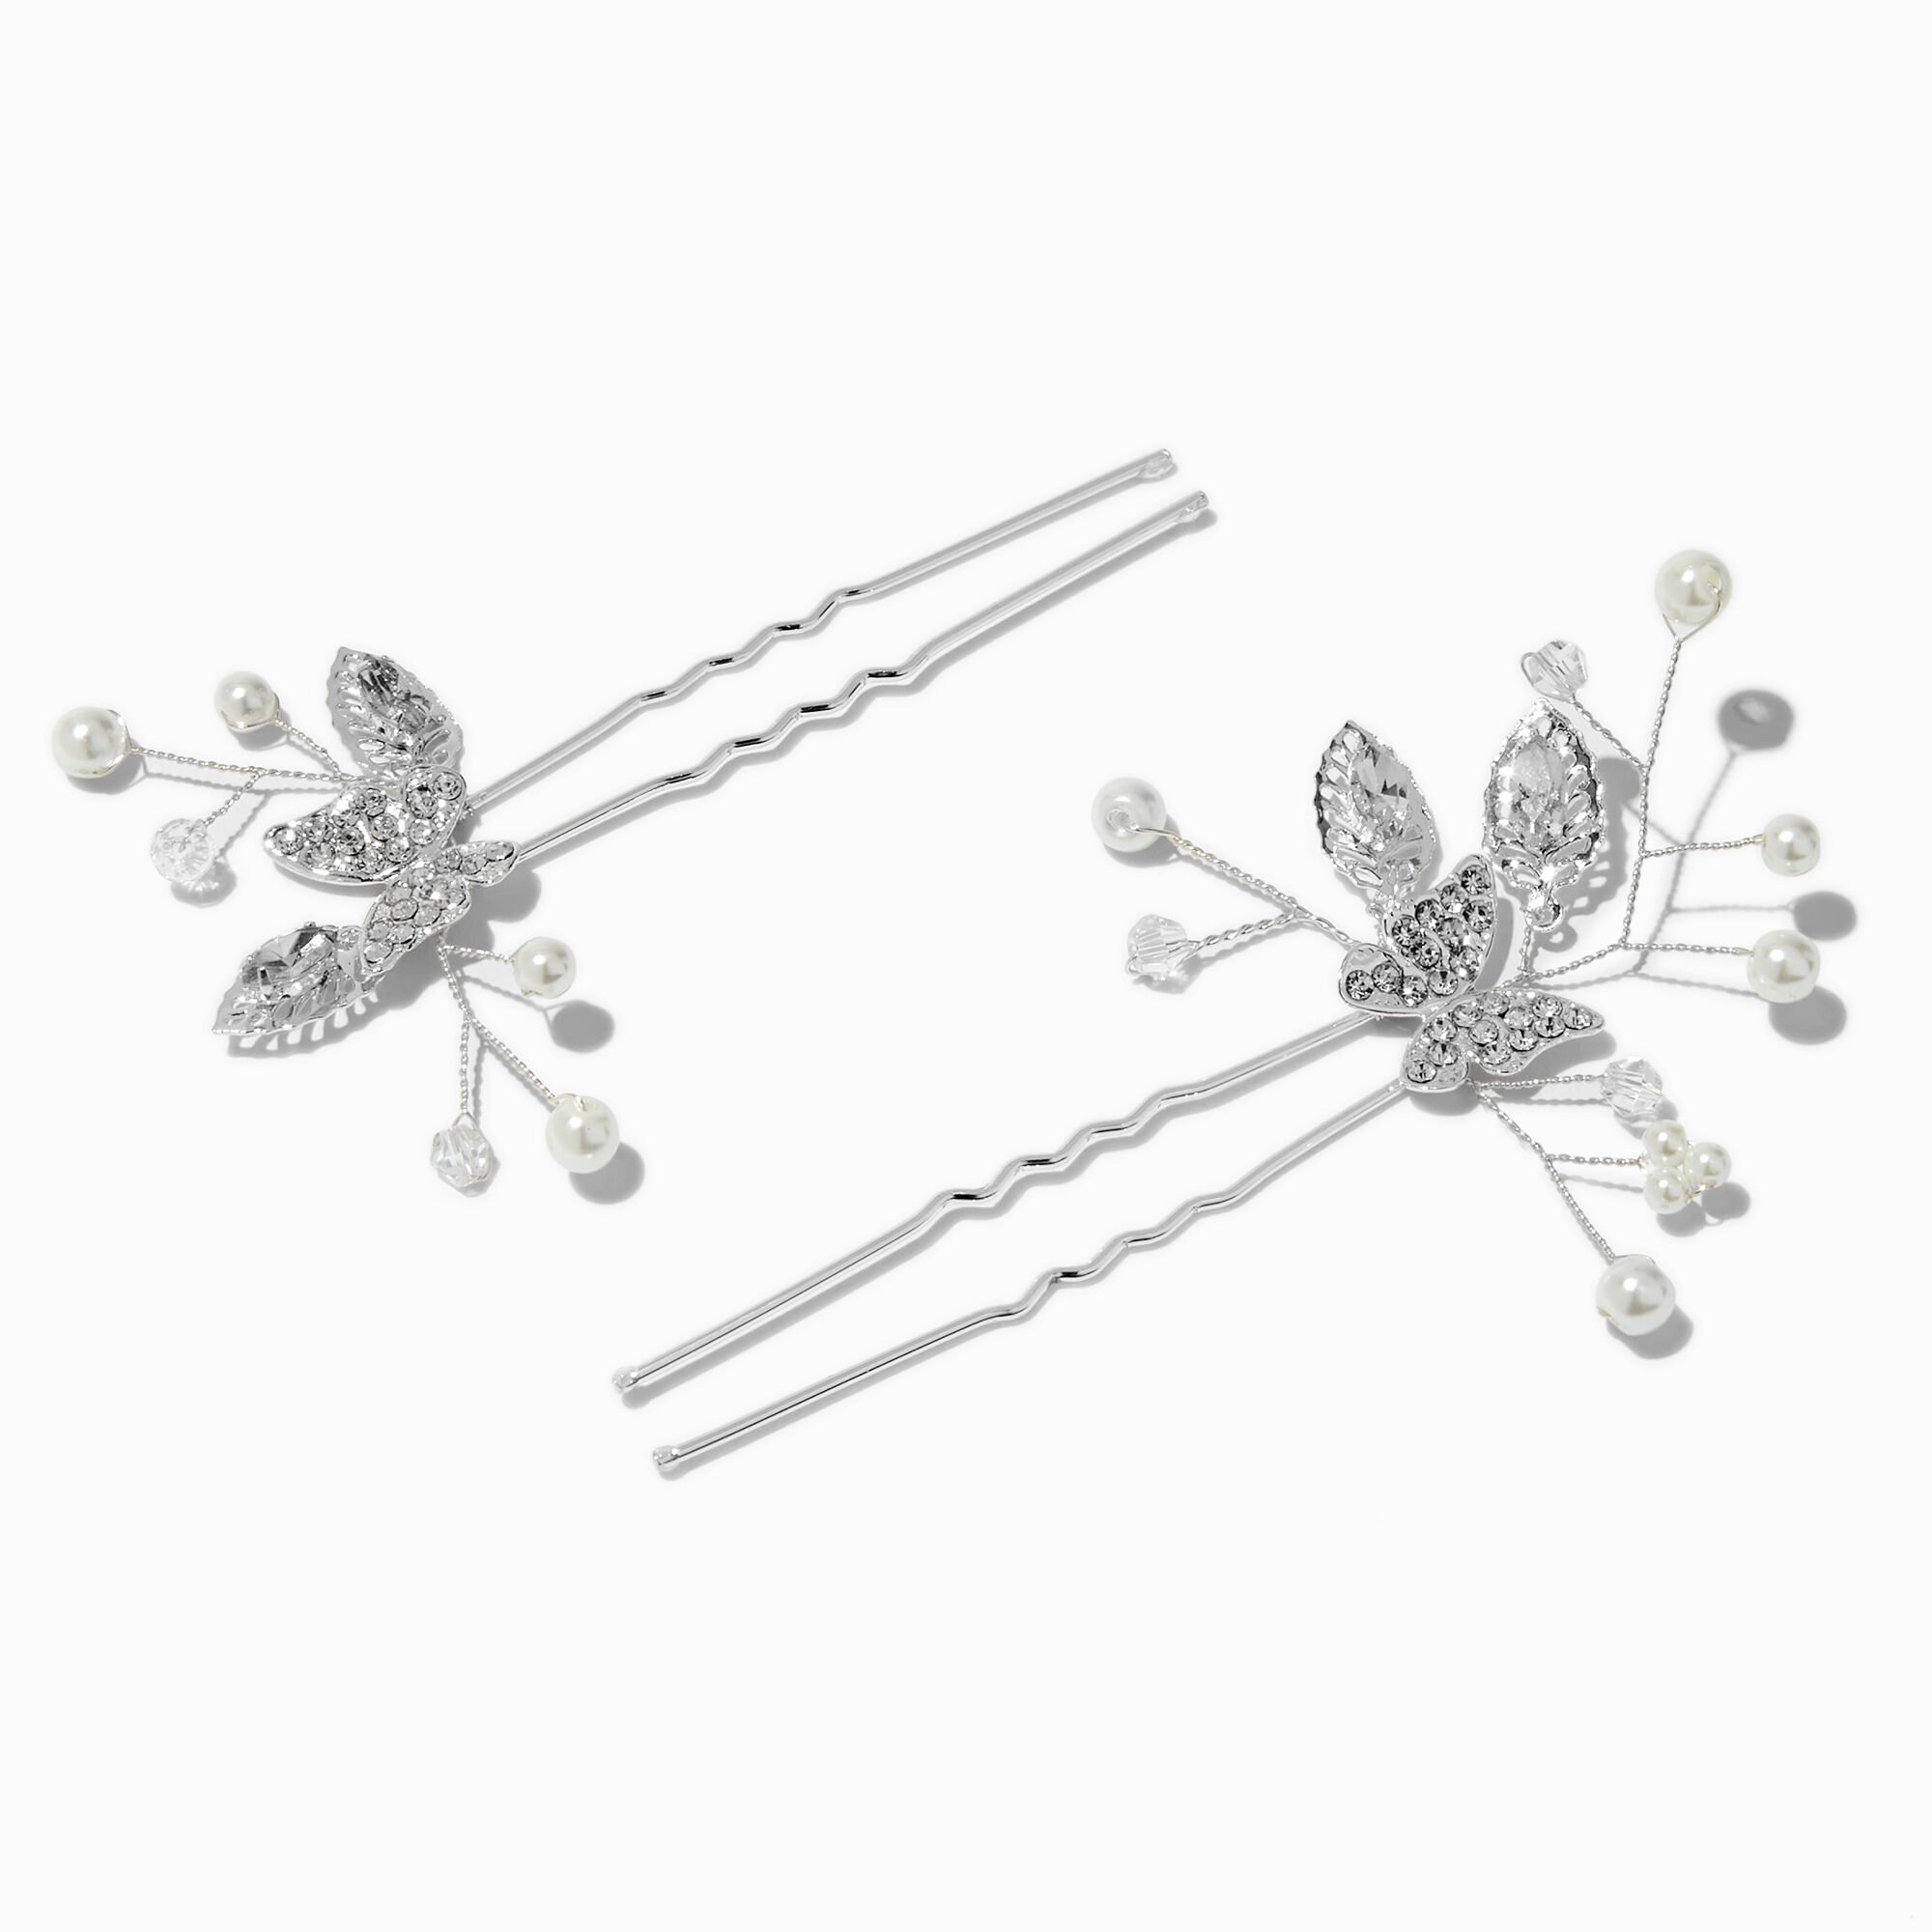 View Claires SilverTone Crystal Butterfly Pearl Spray Hair Pins 2 Pack White information